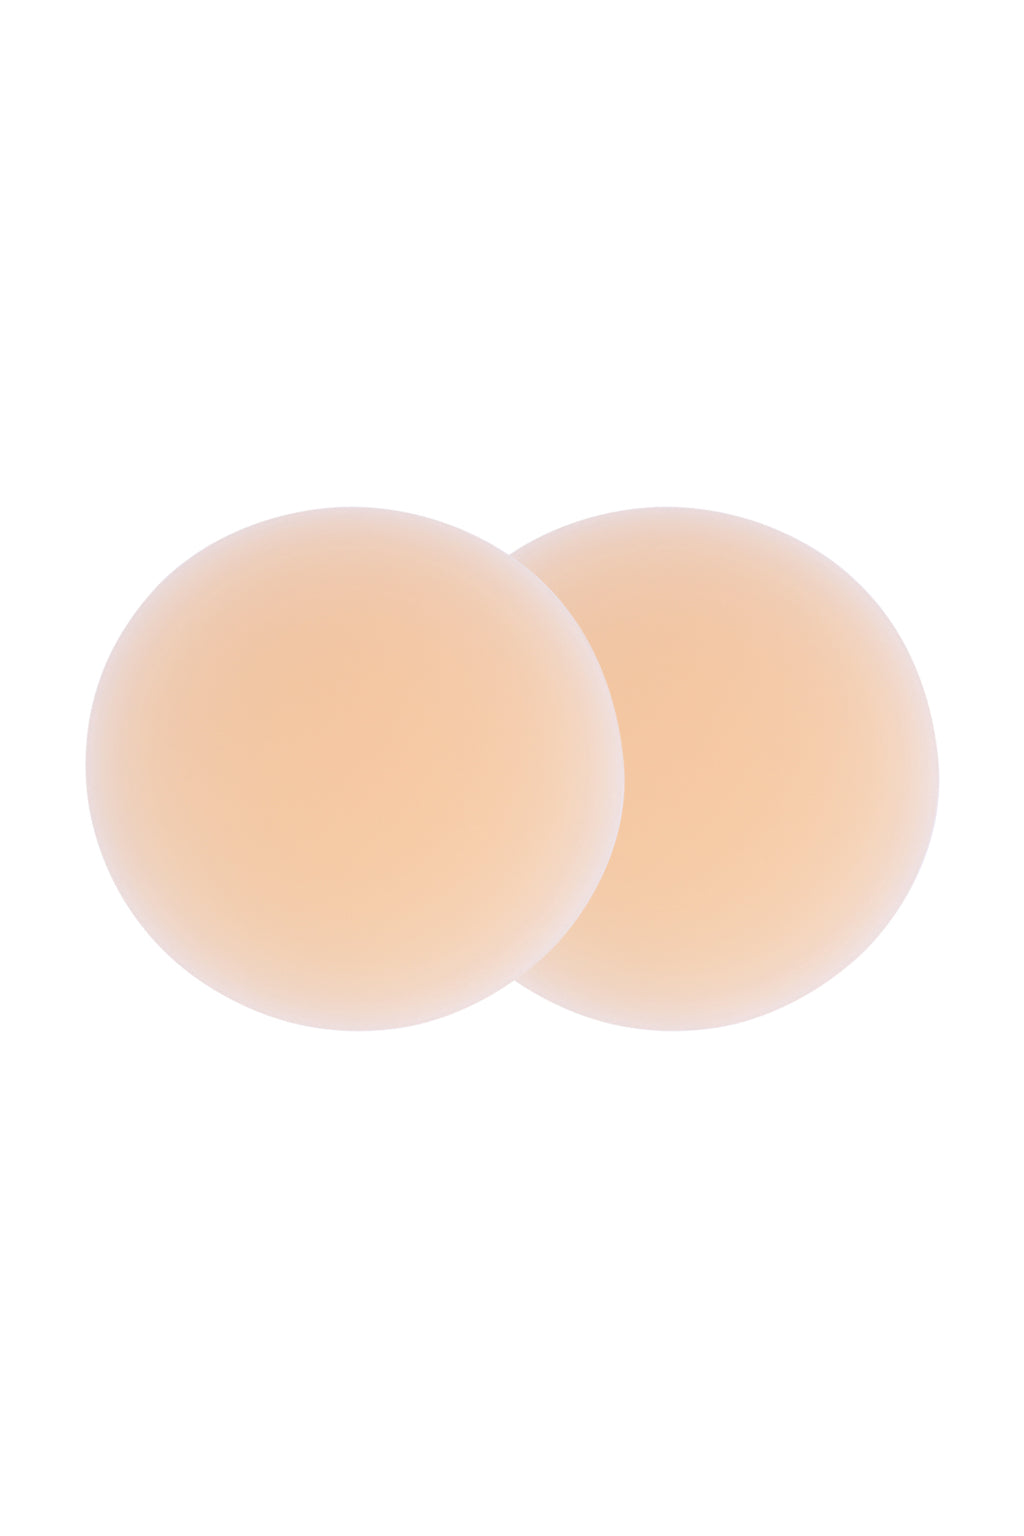 Must Have Nude Non Adhesive Nippies